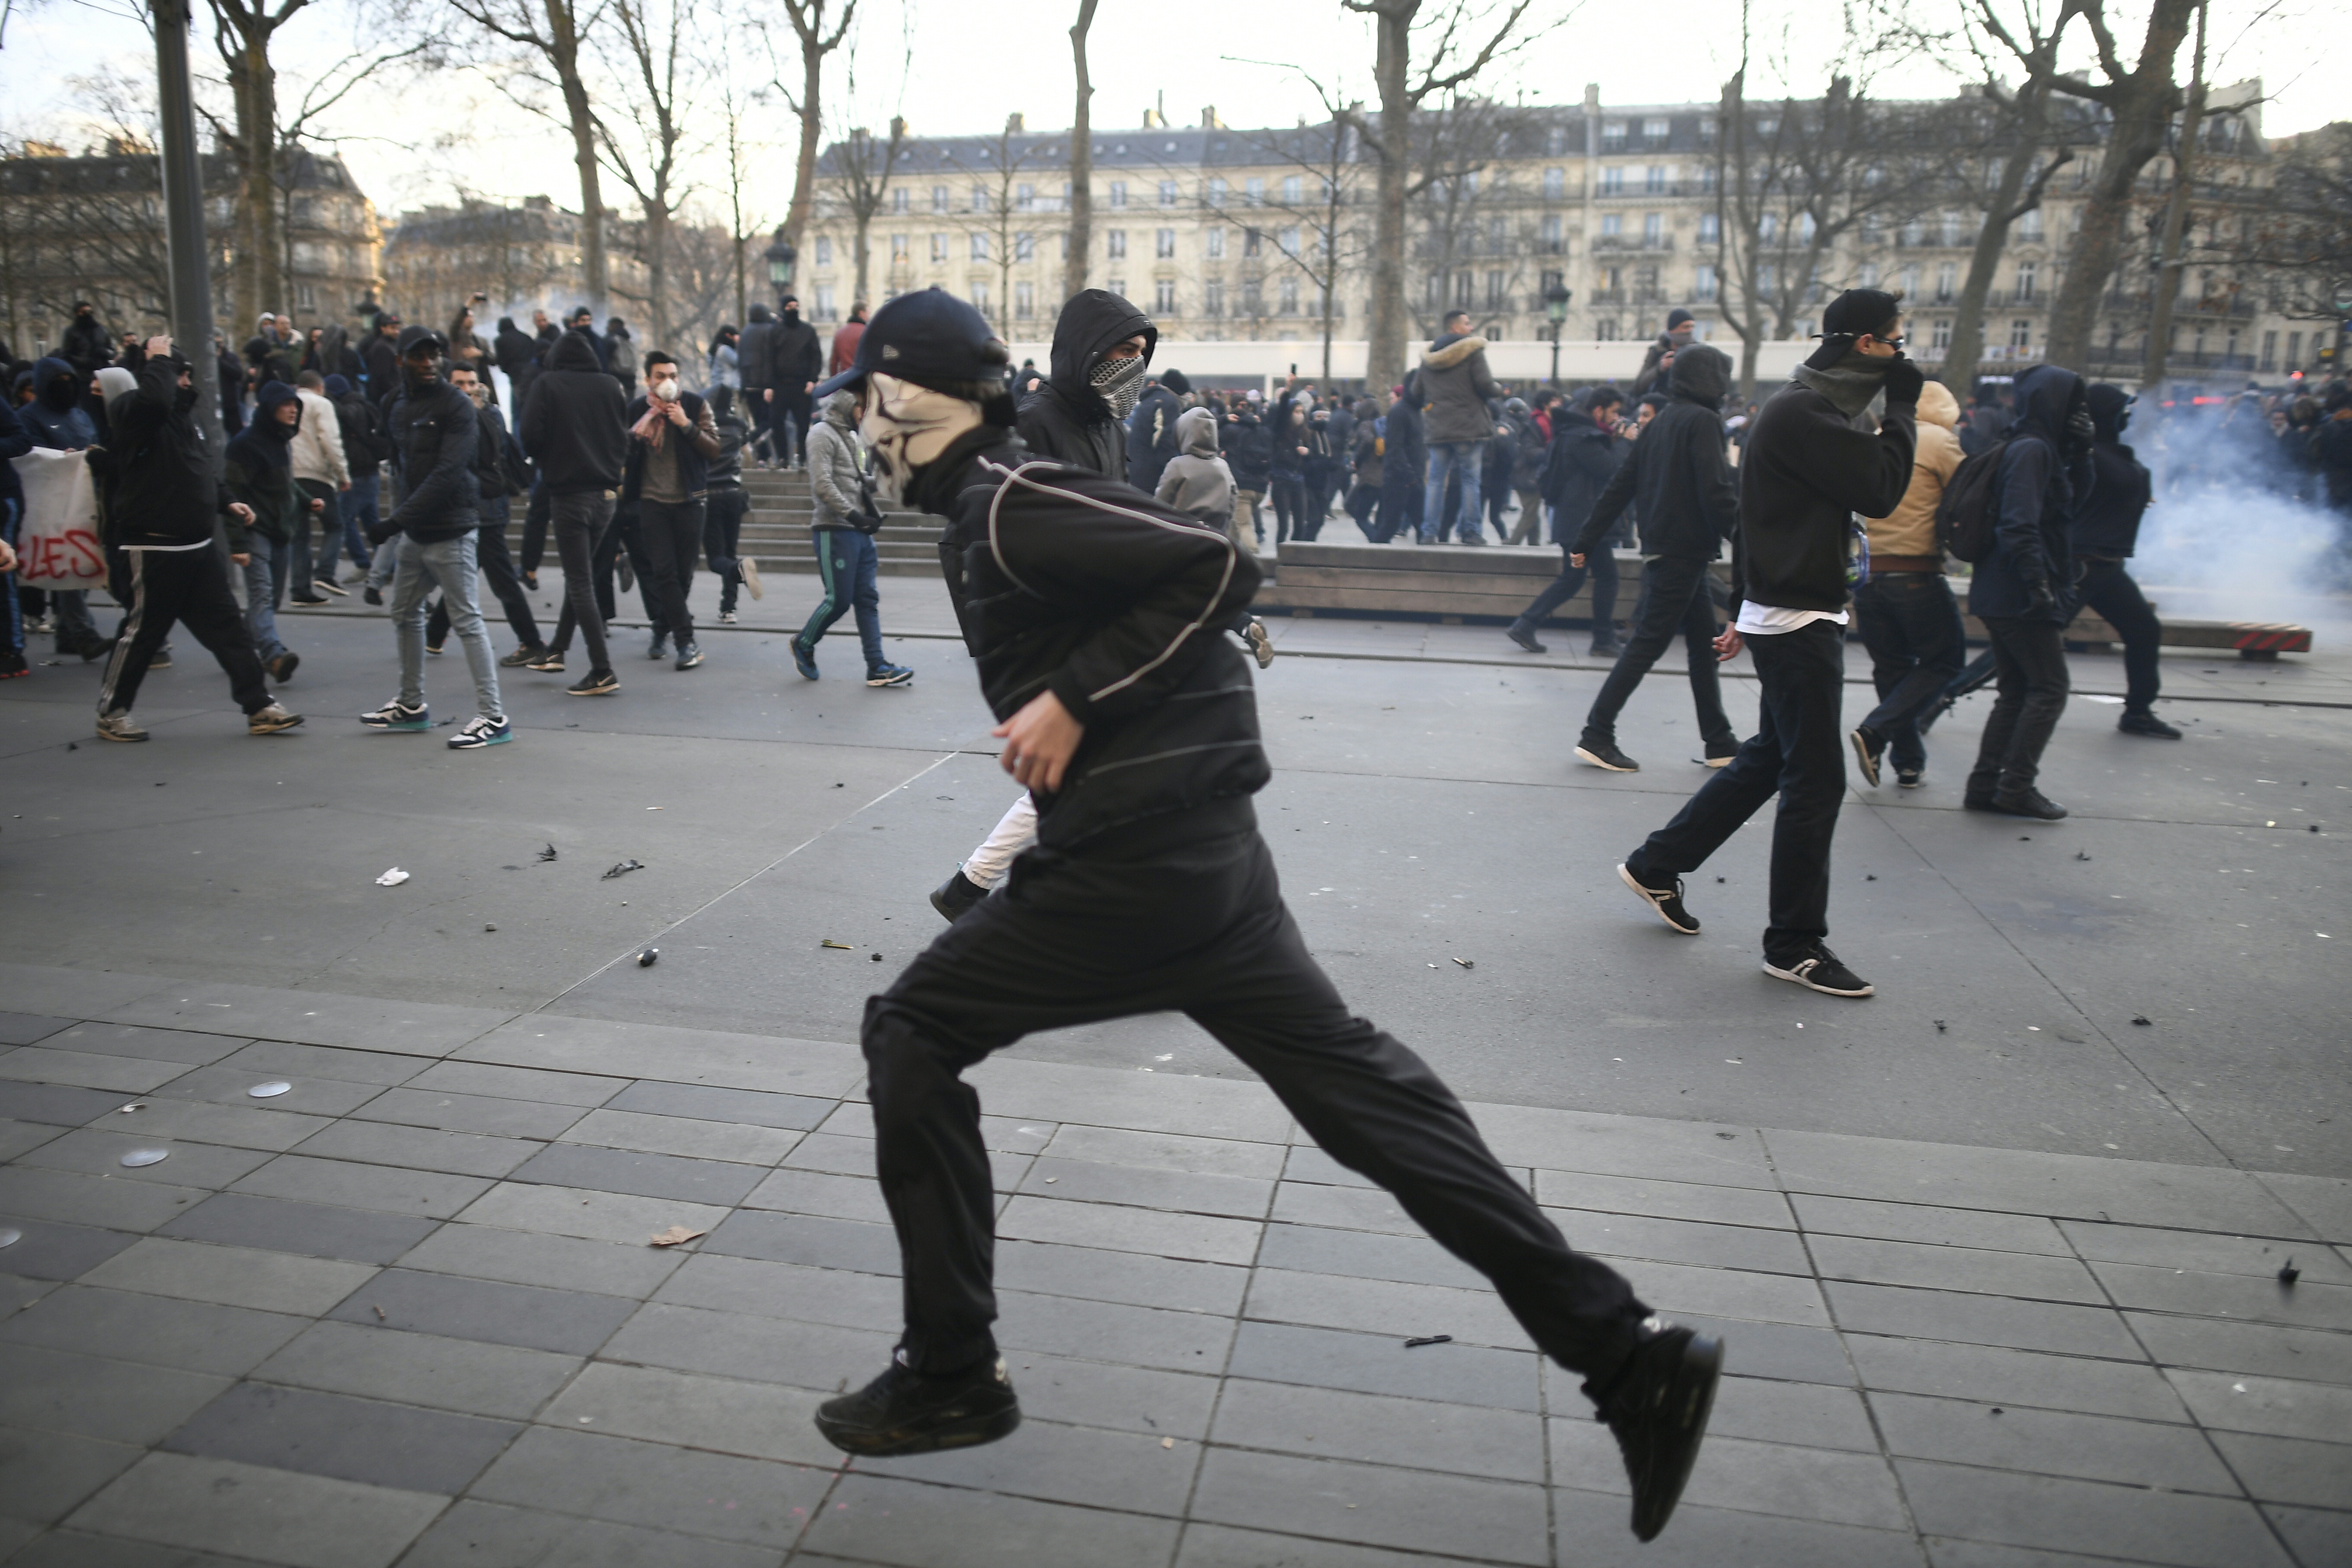 A person runs during a demonstration against police brutality on February 18, 2017 on the place de la Republique in Paris, following the alleged rape of a black youth, identified only as Theo, with a police baton, an incident that has sparked 10 nights of rioting and more than 200 arrests. The injuries sustained by Theo during a stop-and-search operation on February 2 in the suburb of Aulnay-sous-Bois, has revived long-simmering frustrations over policing in immigrant communities, where young men accuse the police of repeatedly targeting them in aggressive stop-and-search operations and using excessive force during arrests.  / AFP PHOTO / Lionel BONAVENTURE